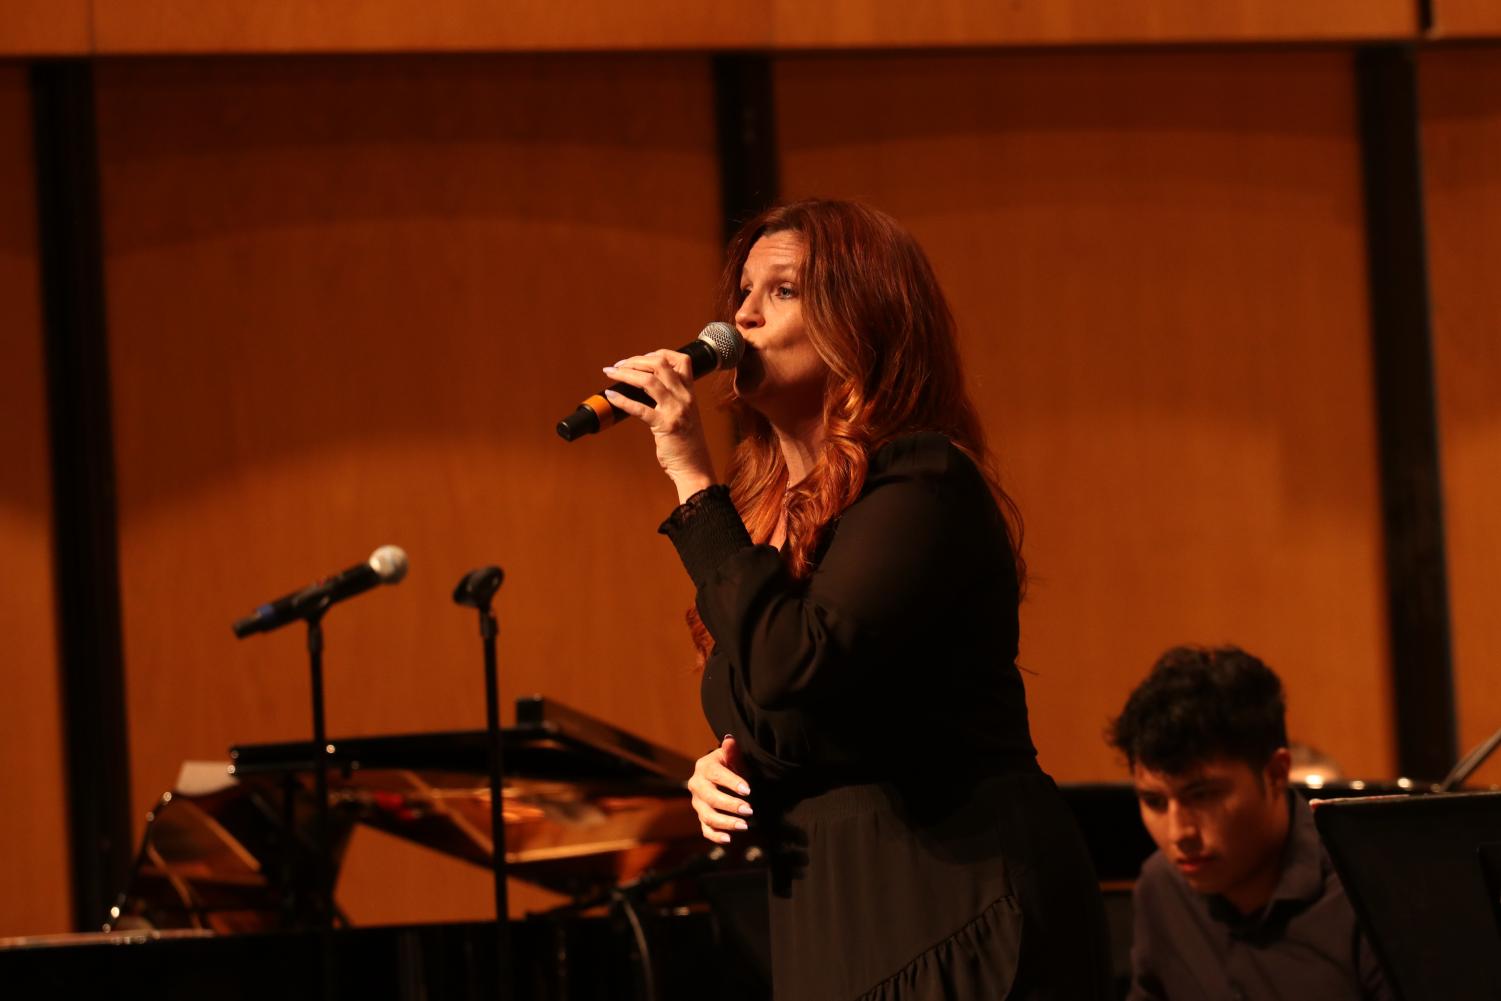 Heather Wood sings during the "All About Jazz" performance in the Performing Arts Center on May 5. 2022 in Moorpark, CA.